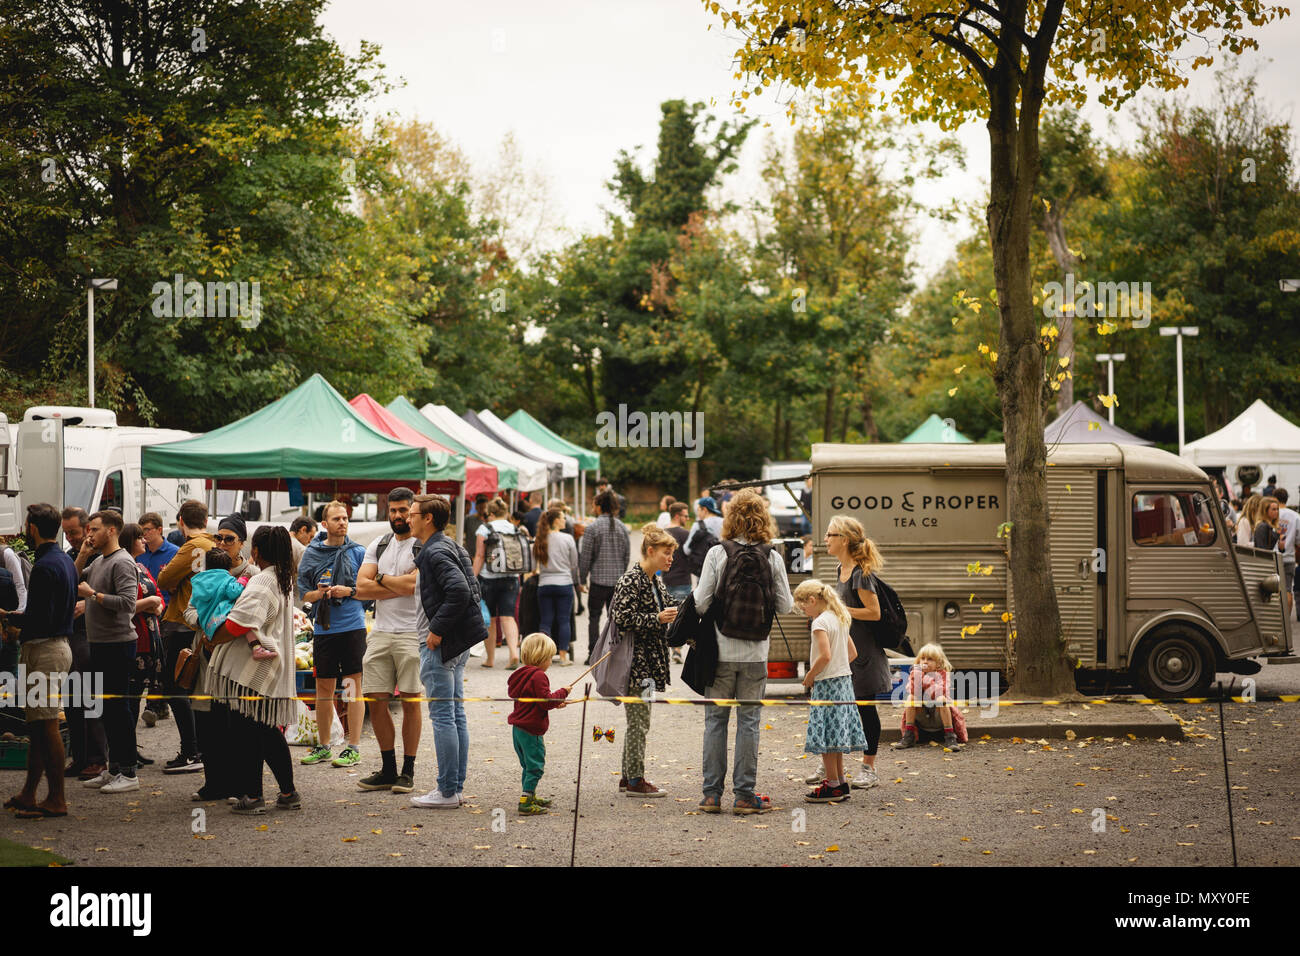 London, UK - October 2017. People at Brockley Market, a local farmer's market held every Saturday in Lewisham. Landscape format. Stock Photo